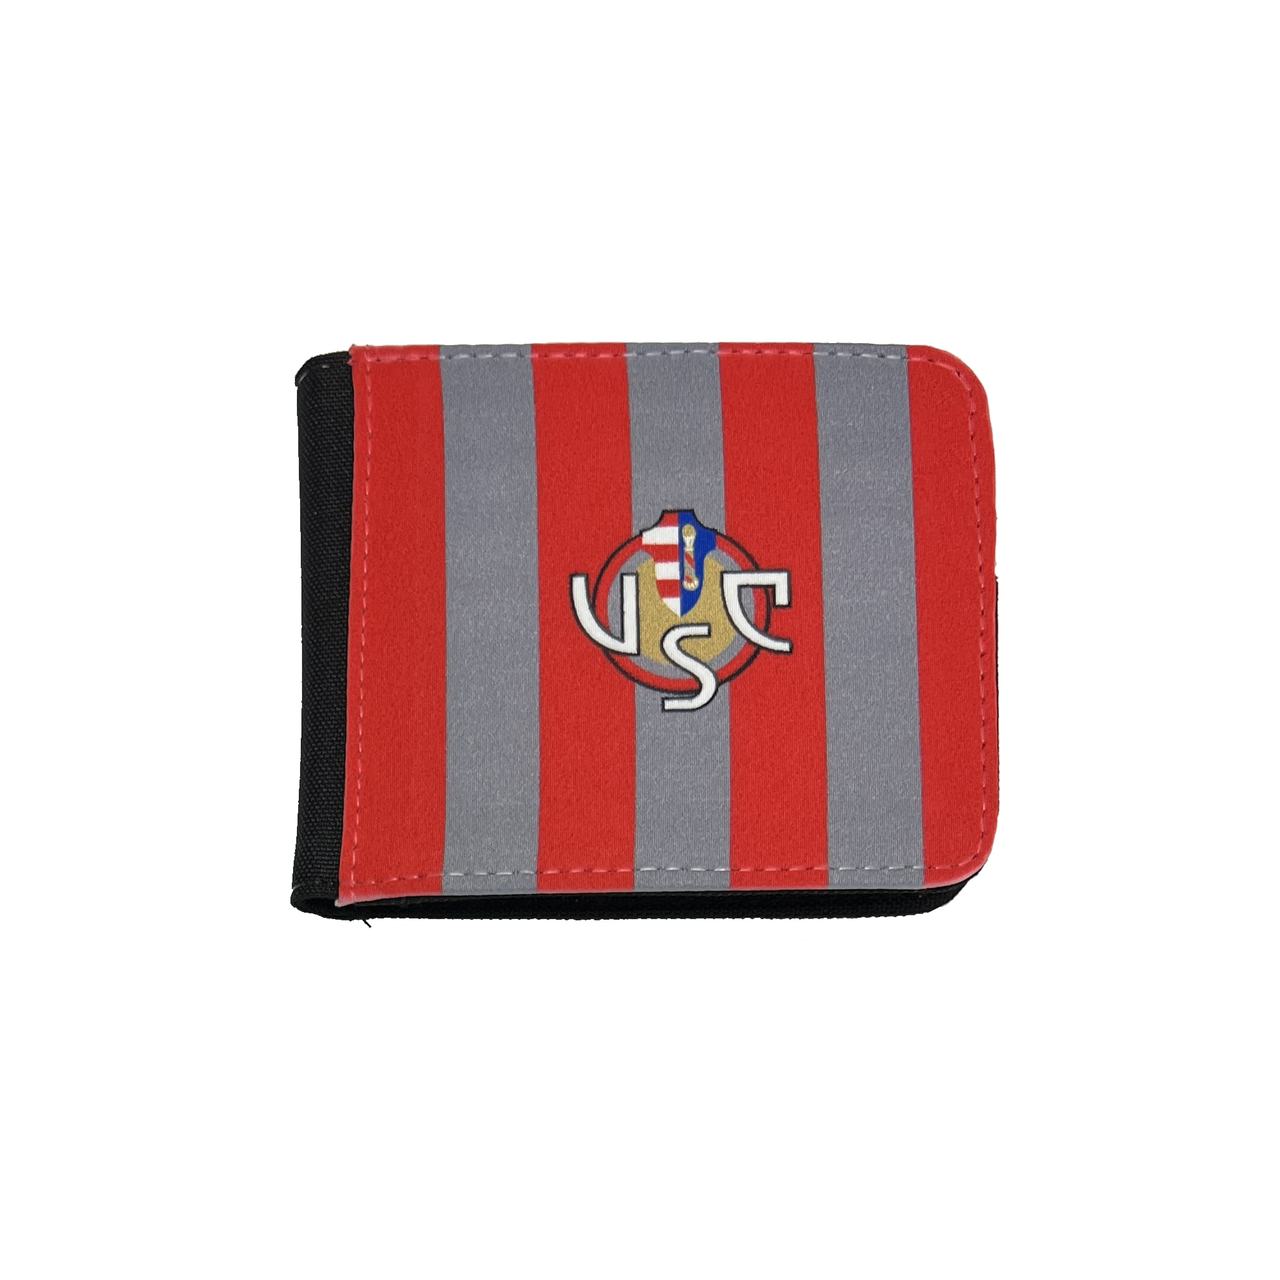 US Cremonese grey-red wallet with logo